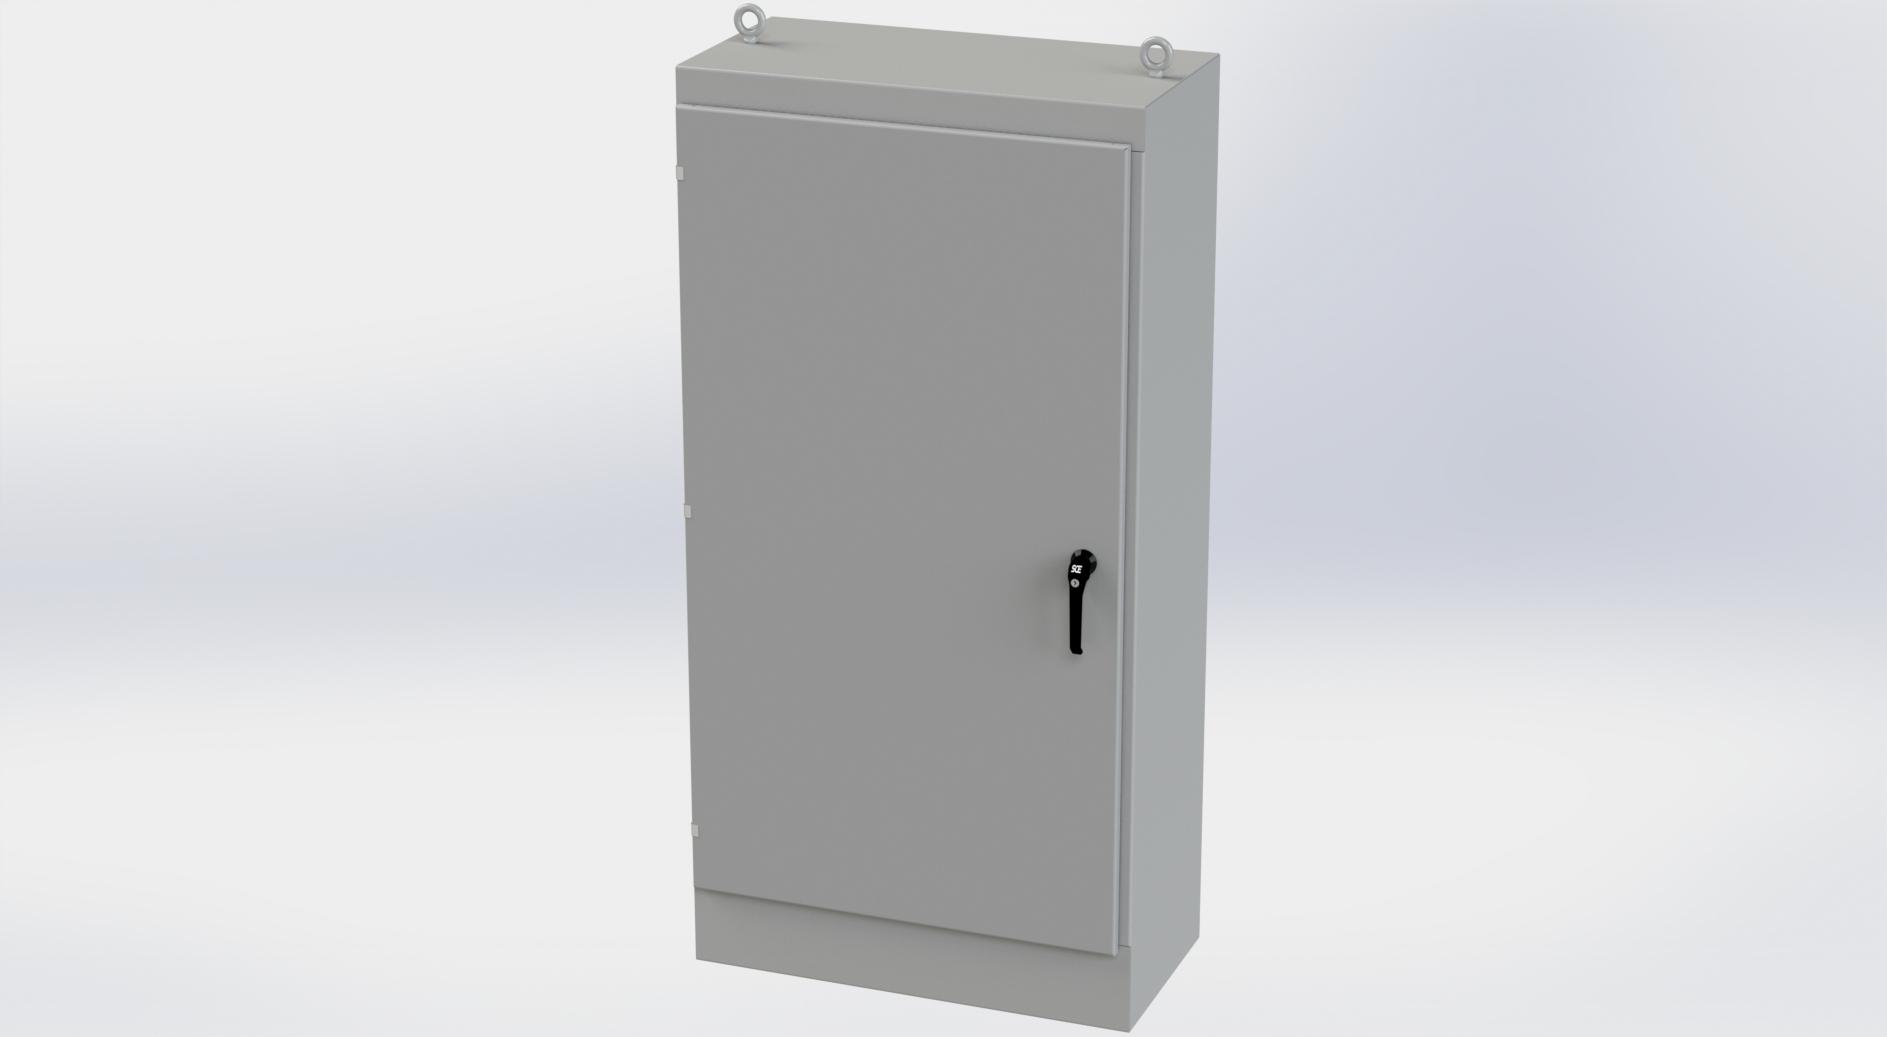 Saginaw Control SCE-723618FS FS Enclosure, Height:72.00", Width:36.00", Depth:18.00", ANSI-61 gray powder coat inside and out. Optional sub-panels are powder coated white.